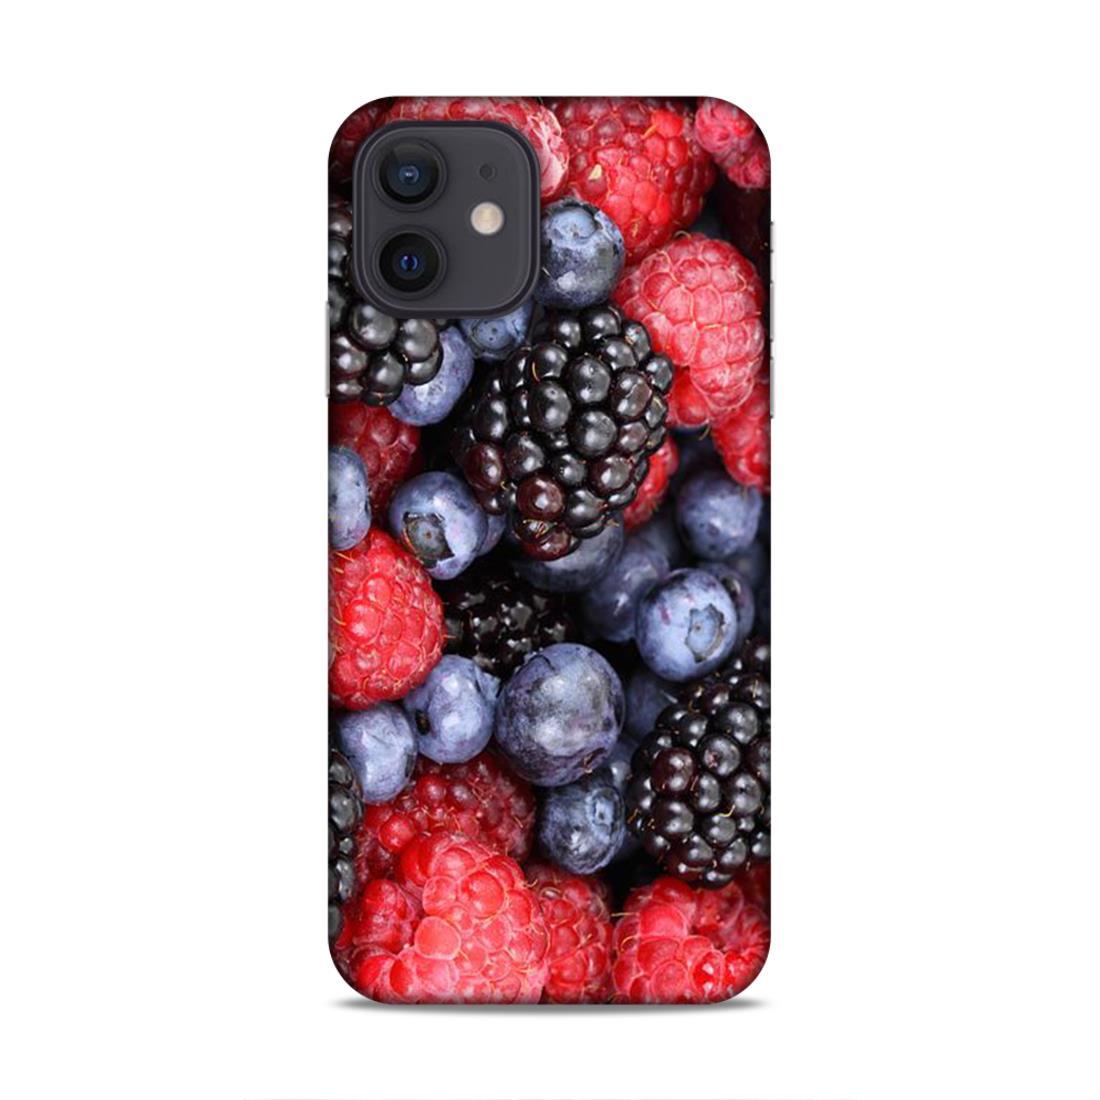 MultiFruits Love iPhone 12 Mobile Back Case